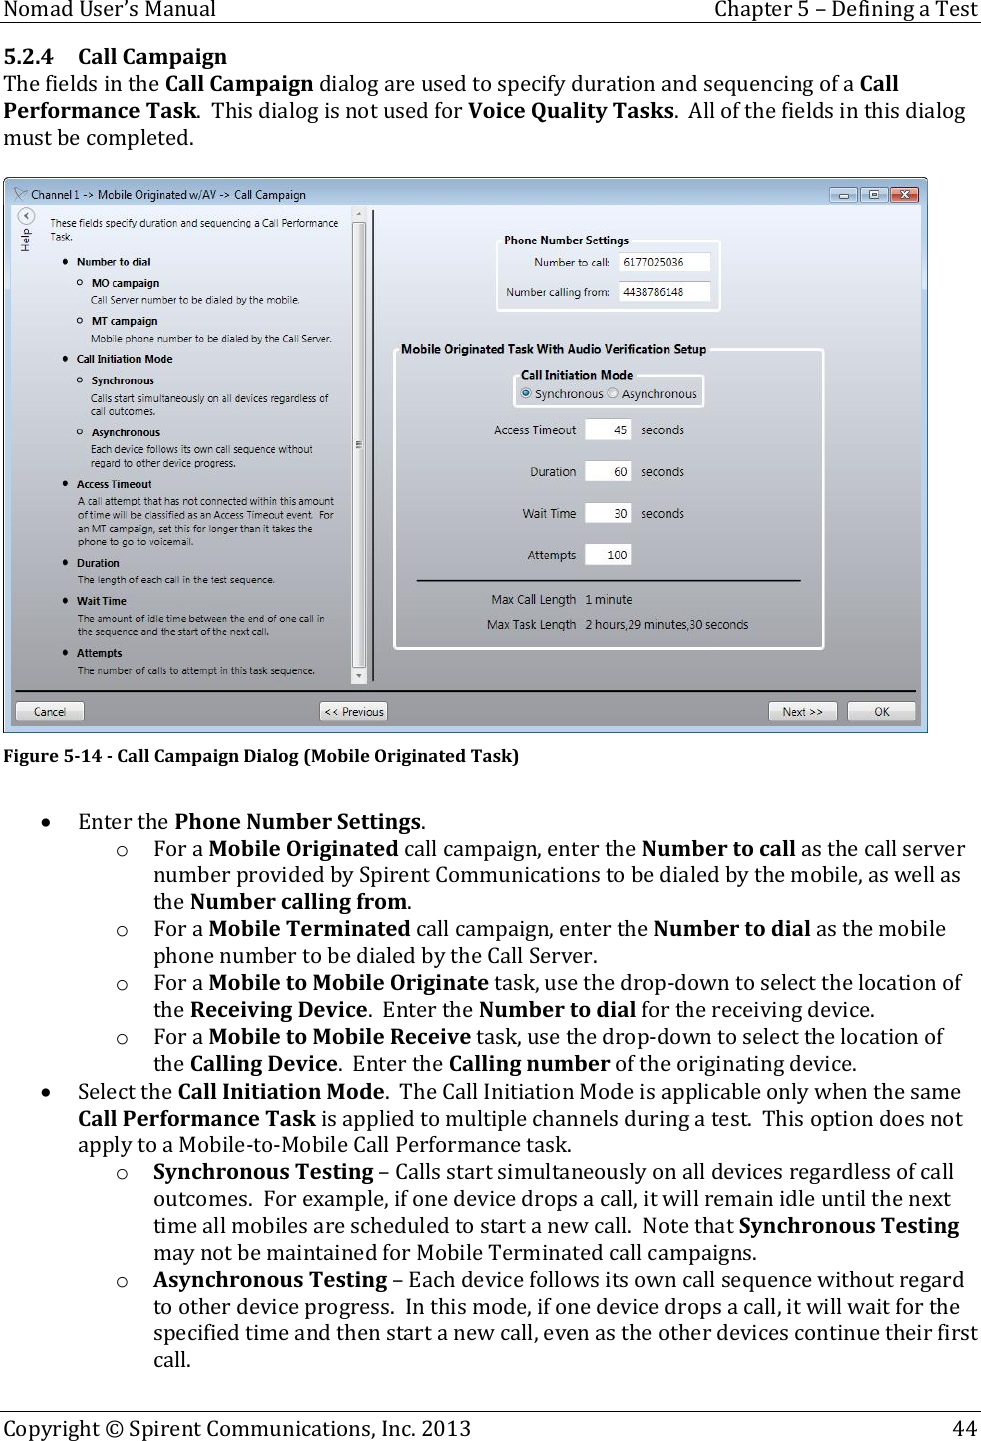  Nomad User’s Manual  Chapter 5 – Defining a Test Copyright © Spirent Communications, Inc. 2013    44  5.2.4 Call Campaign The fields in the Call Campaign dialog are used to specify duration and sequencing of a Call Performance Task.  This dialog is not used for Voice Quality Tasks.  All of the fields in this dialog must be completed.   Figure 5-14 - Call Campaign Dialog (Mobile Originated Task)   Enter the Phone Number Settings. o For a Mobile Originated call campaign, enter the Number to call as the call server number provided by Spirent Communications to be dialed by the mobile, as well as the Number calling from. o For a Mobile Terminated call campaign, enter the Number to dial as the mobile phone number to be dialed by the Call Server. o For a Mobile to Mobile Originate task, use the drop-down to select the location of the Receiving Device.  Enter the Number to dial for the receiving device. o For a Mobile to Mobile Receive task, use the drop-down to select the location of the Calling Device.  Enter the Calling number of the originating device.  Select the Call Initiation Mode.  The Call Initiation Mode is applicable only when the same Call Performance Task is applied to multiple channels during a test.  This option does not apply to a Mobile-to-Mobile Call Performance task. o Synchronous Testing – Calls start simultaneously on all devices regardless of call outcomes.  For example, if one device drops a call, it will remain idle until the next time all mobiles are scheduled to start a new call.  Note that Synchronous Testing may not be maintained for Mobile Terminated call campaigns. o Asynchronous Testing – Each device follows its own call sequence without regard to other device progress.  In this mode, if one device drops a call, it will wait for the specified time and then start a new call, even as the other devices continue their first call. 